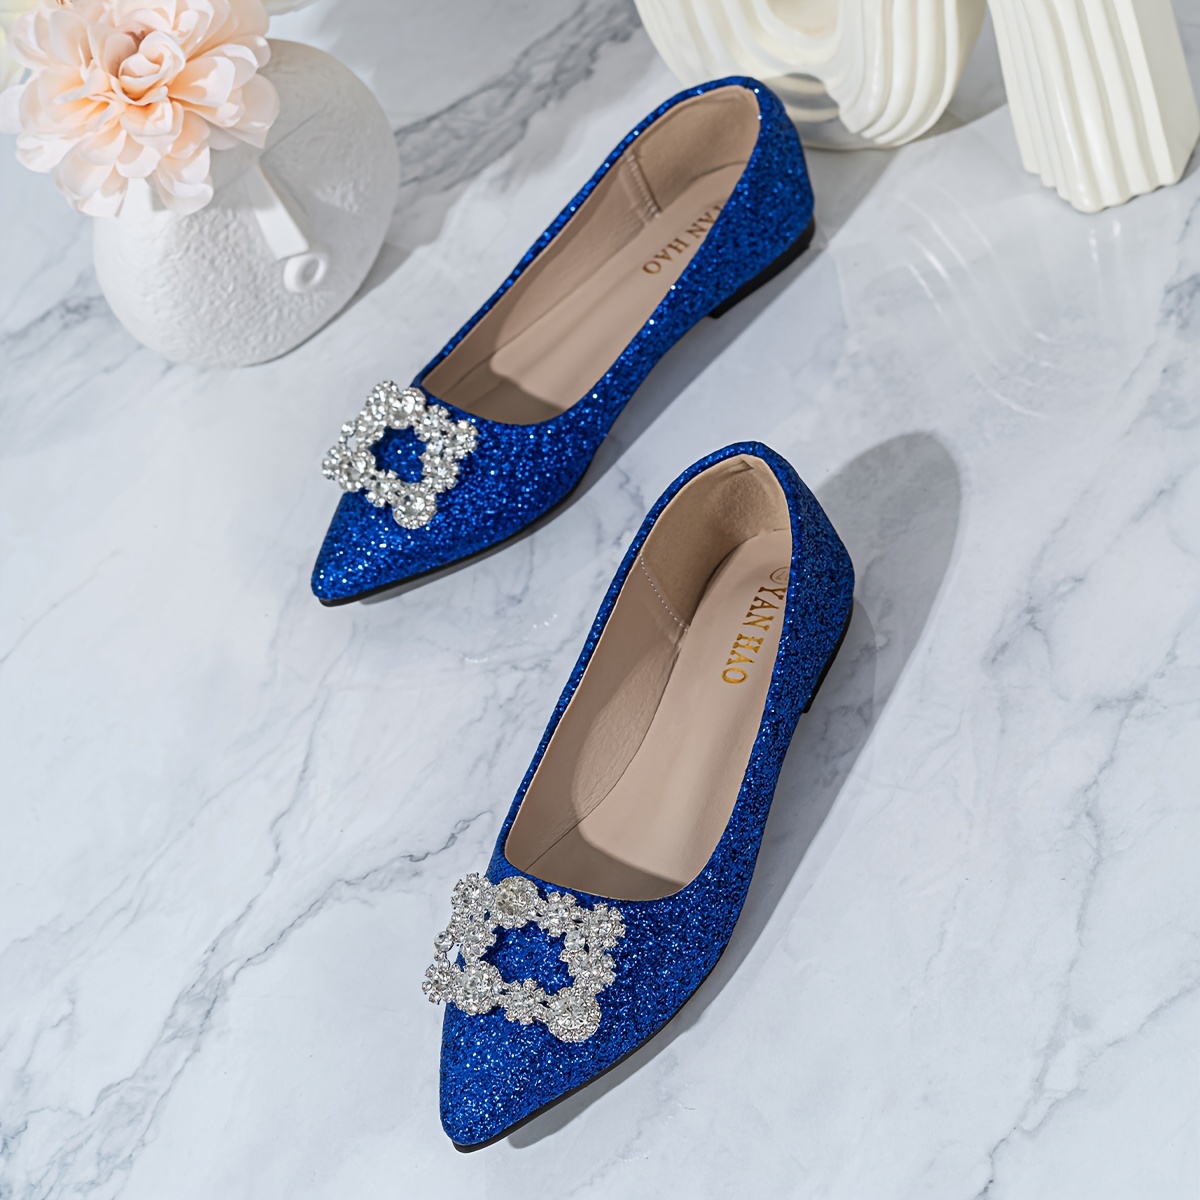 

Women's Rhinestone Buckle Decor Flats, Fashion Sequins Pointed Toe Slip On Shoes, All-match Evening Dress Flats For Music Festival